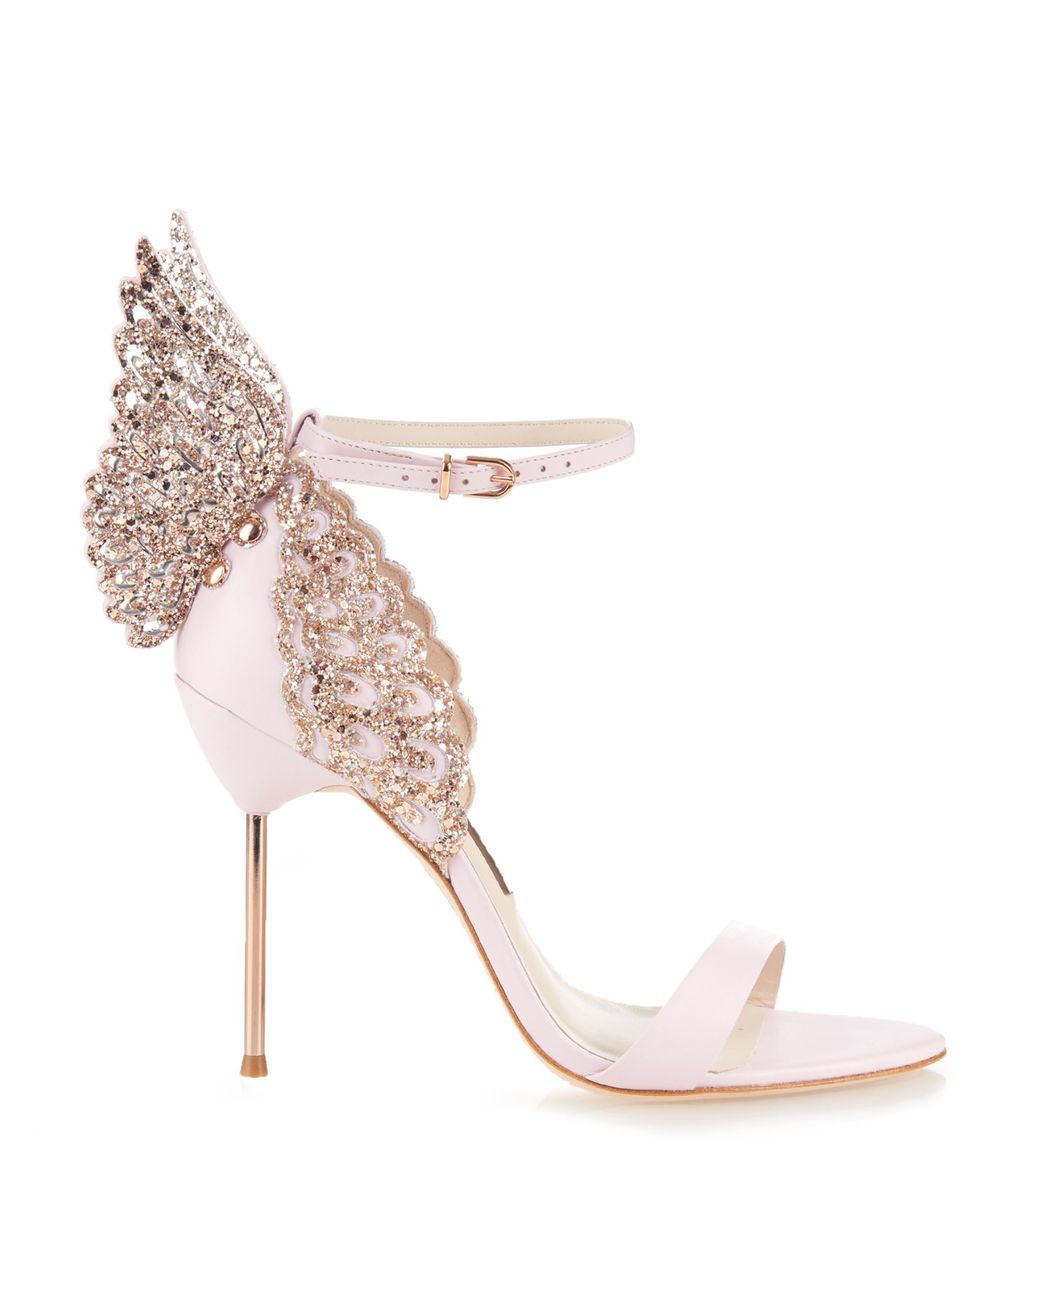 2020 Rhinestone Angel Wings Stiletto Lady High Heels Sandals Tribute Rome  Style Designed Pumps Party Dress Shoes Leaf 11cm Heels S8038528 From Rsui,  $71.53 | DHgate.Com